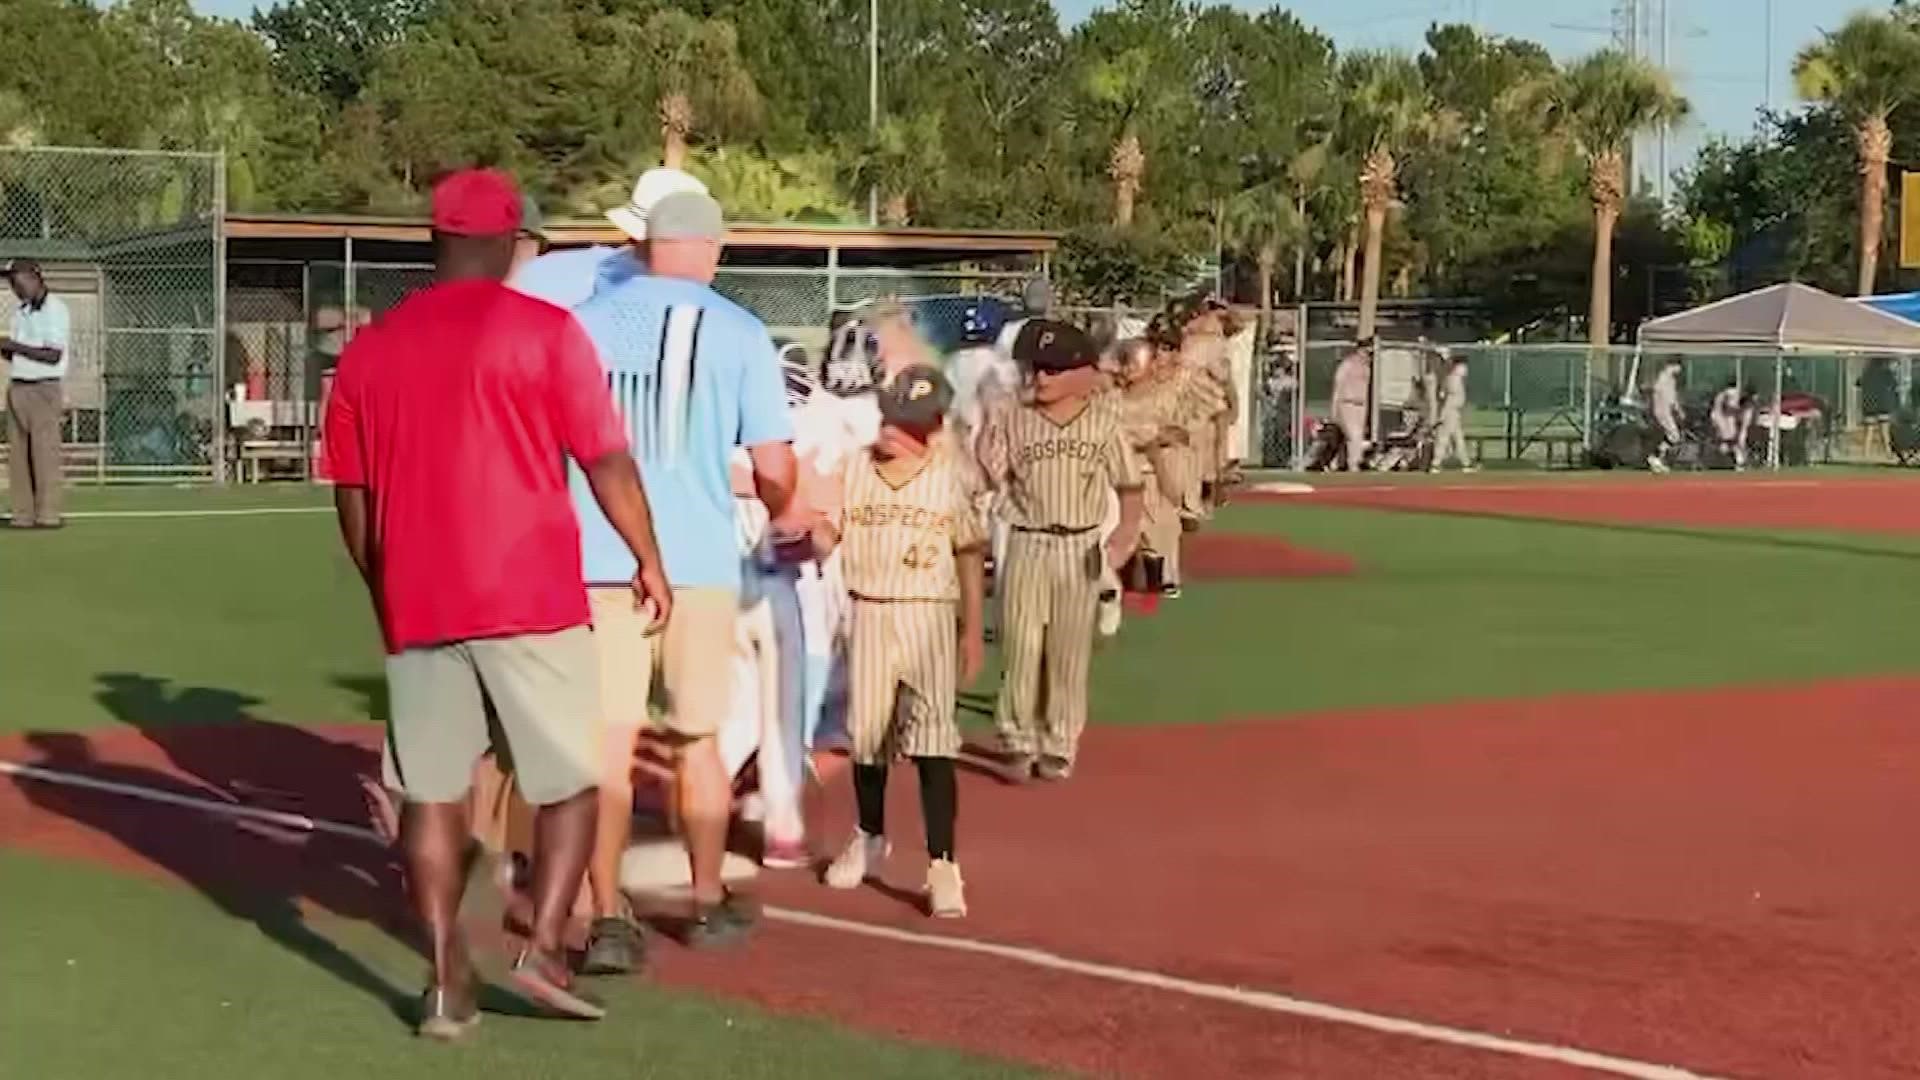 Kenneth Wendt's poor sportsmanship was caught on camera after his 9-and-under Scorpions Baseball team lost to Prospects Baseball on Saturday.